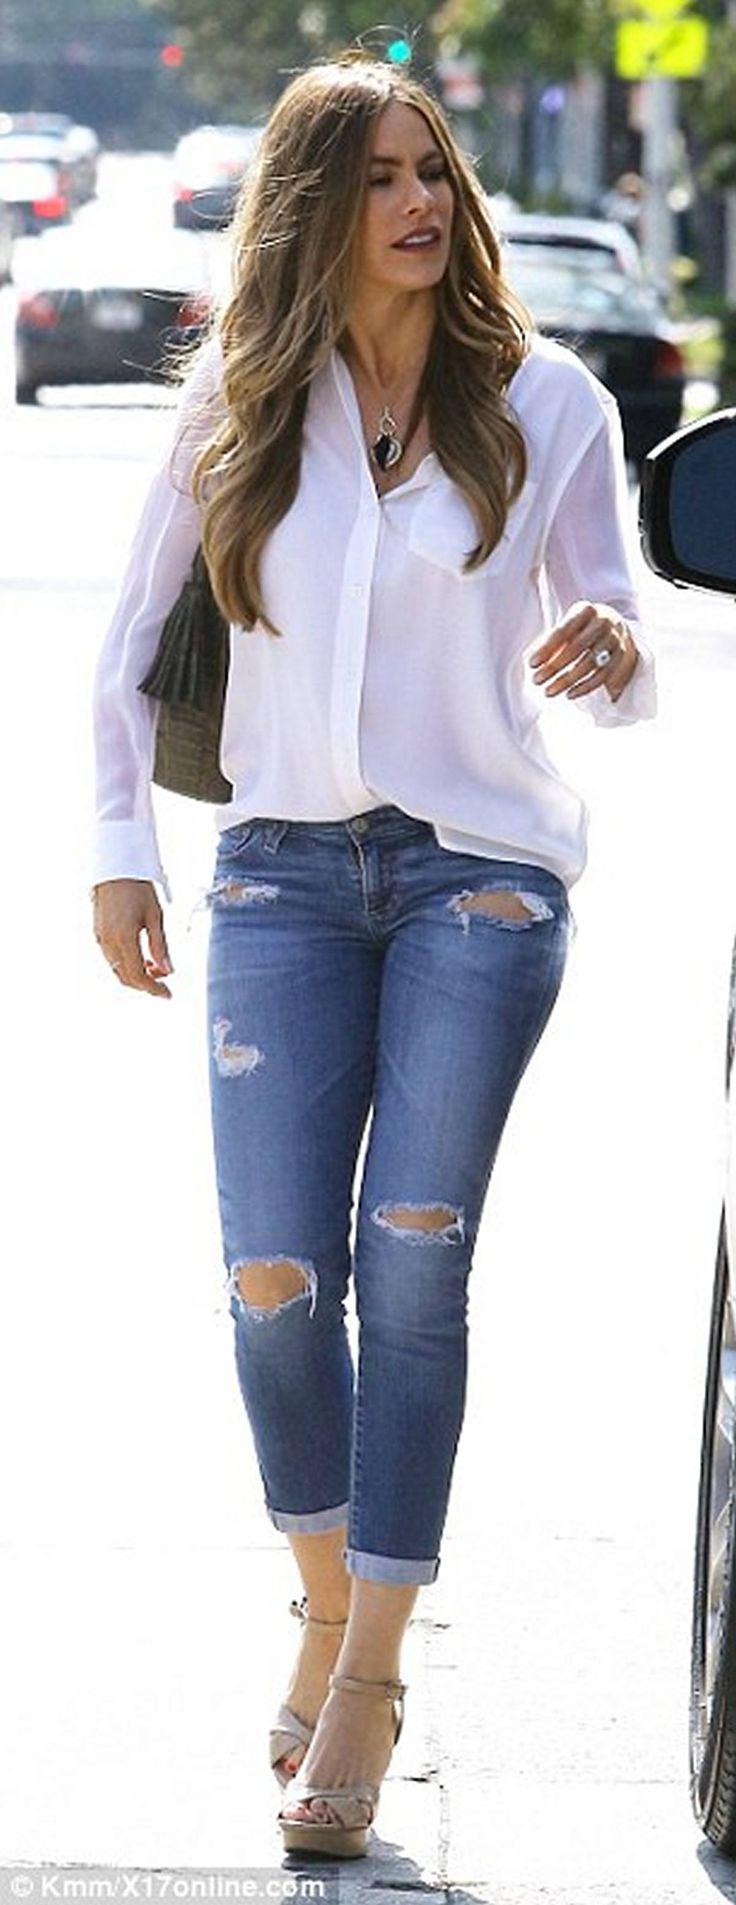 Married... with Children. 80+ Best Sofia Vergara Outfit Ideas Looks!: Denim Outfits,  Ripped Jeans,  Jennifer Lopez,  Television show,  Skin-Tight Garment,  Joe Manganiello,  sofia vergara,  Skin tight  